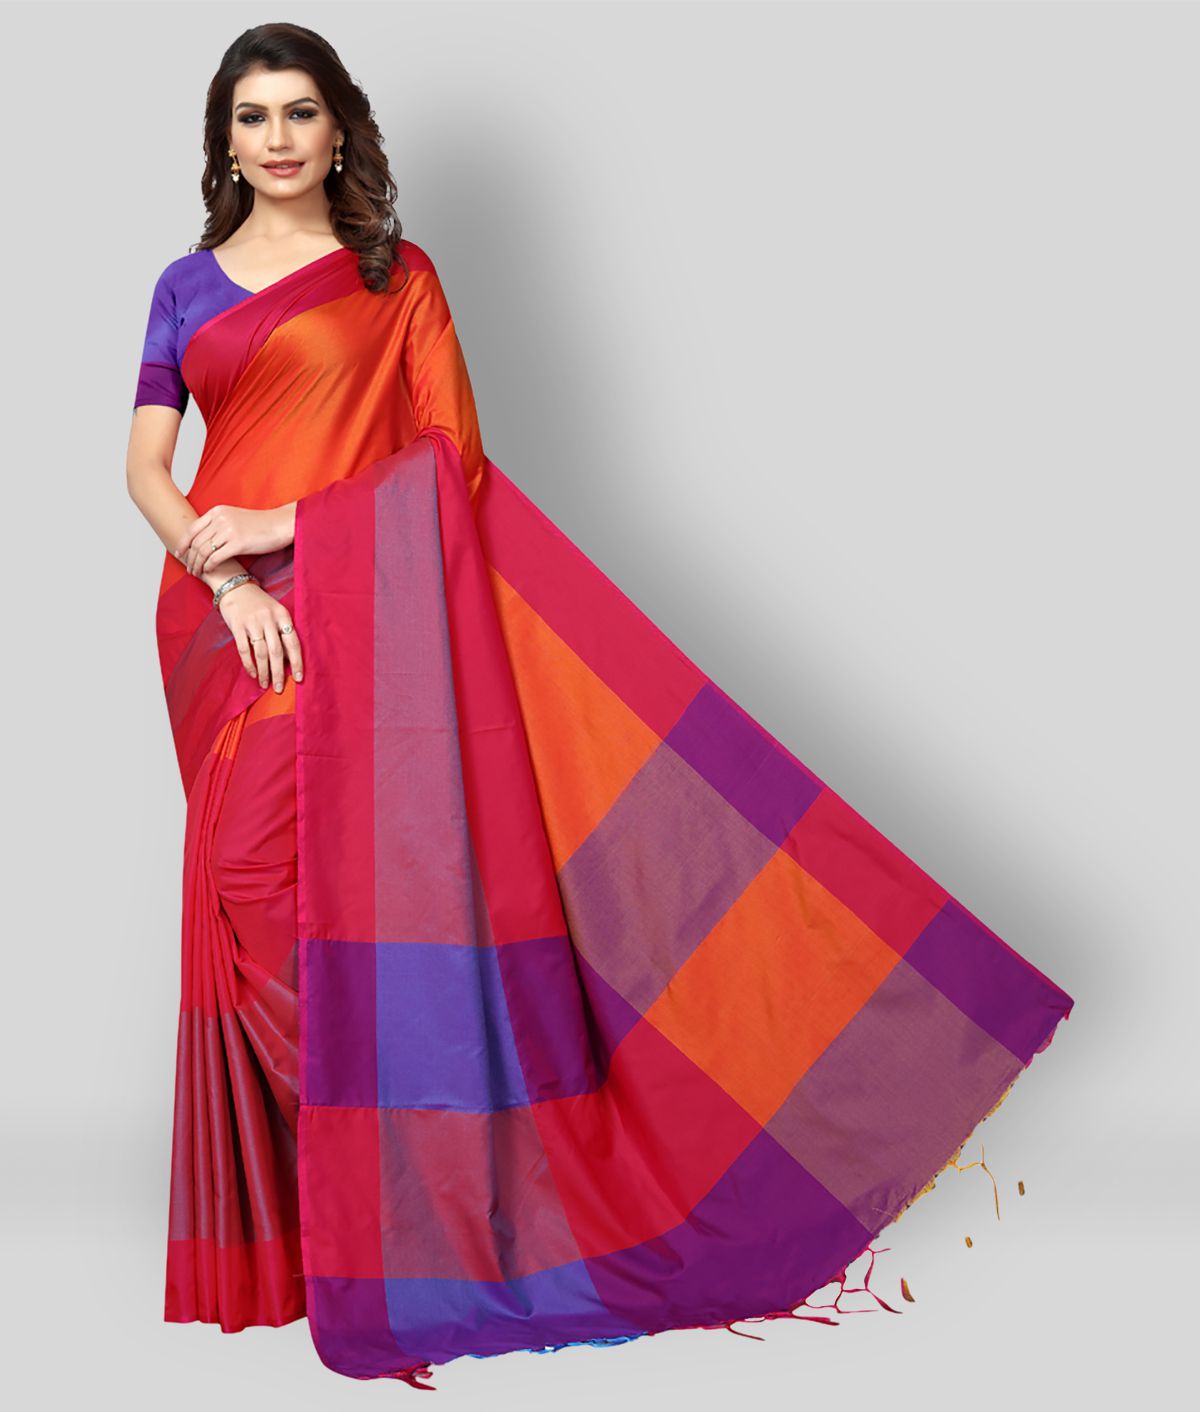 NightBlue - Multicolor Cotton Blend Saree With Blouse Piece ( Pack of 1 )